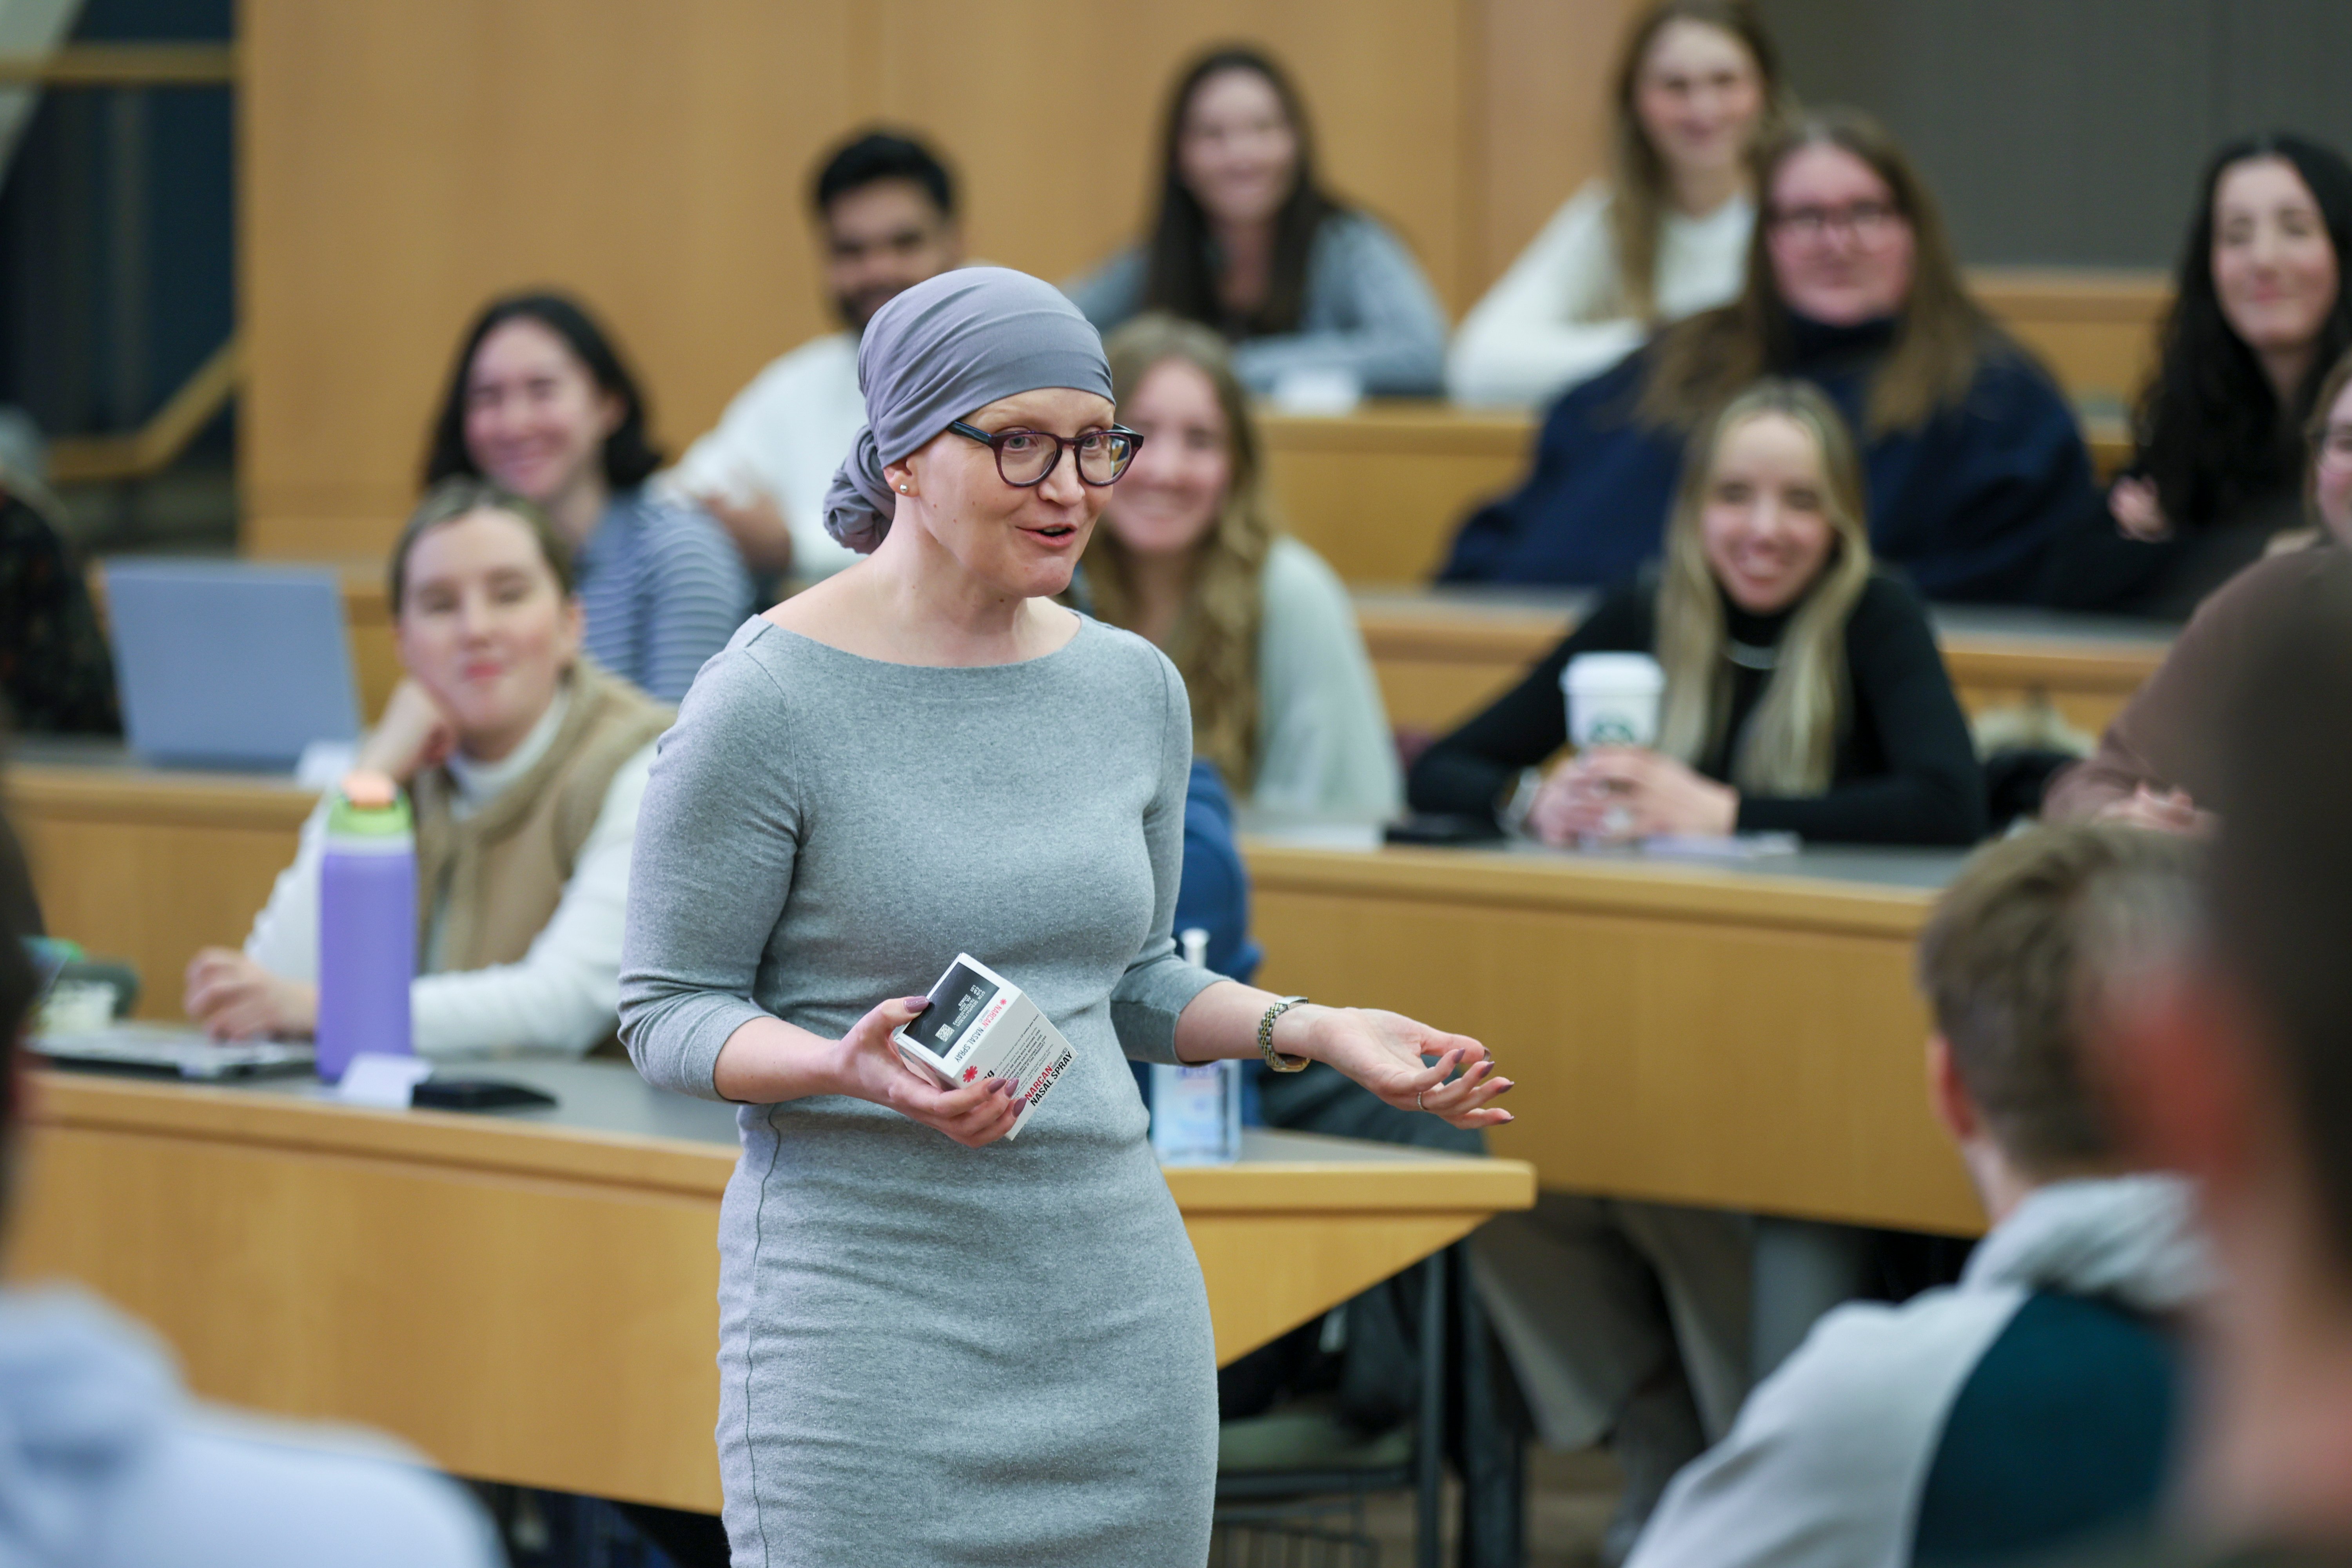 Poland teaches College of Human Medicine students how to recognize, be prepared for, and treat opioid overdose using Naloxone.